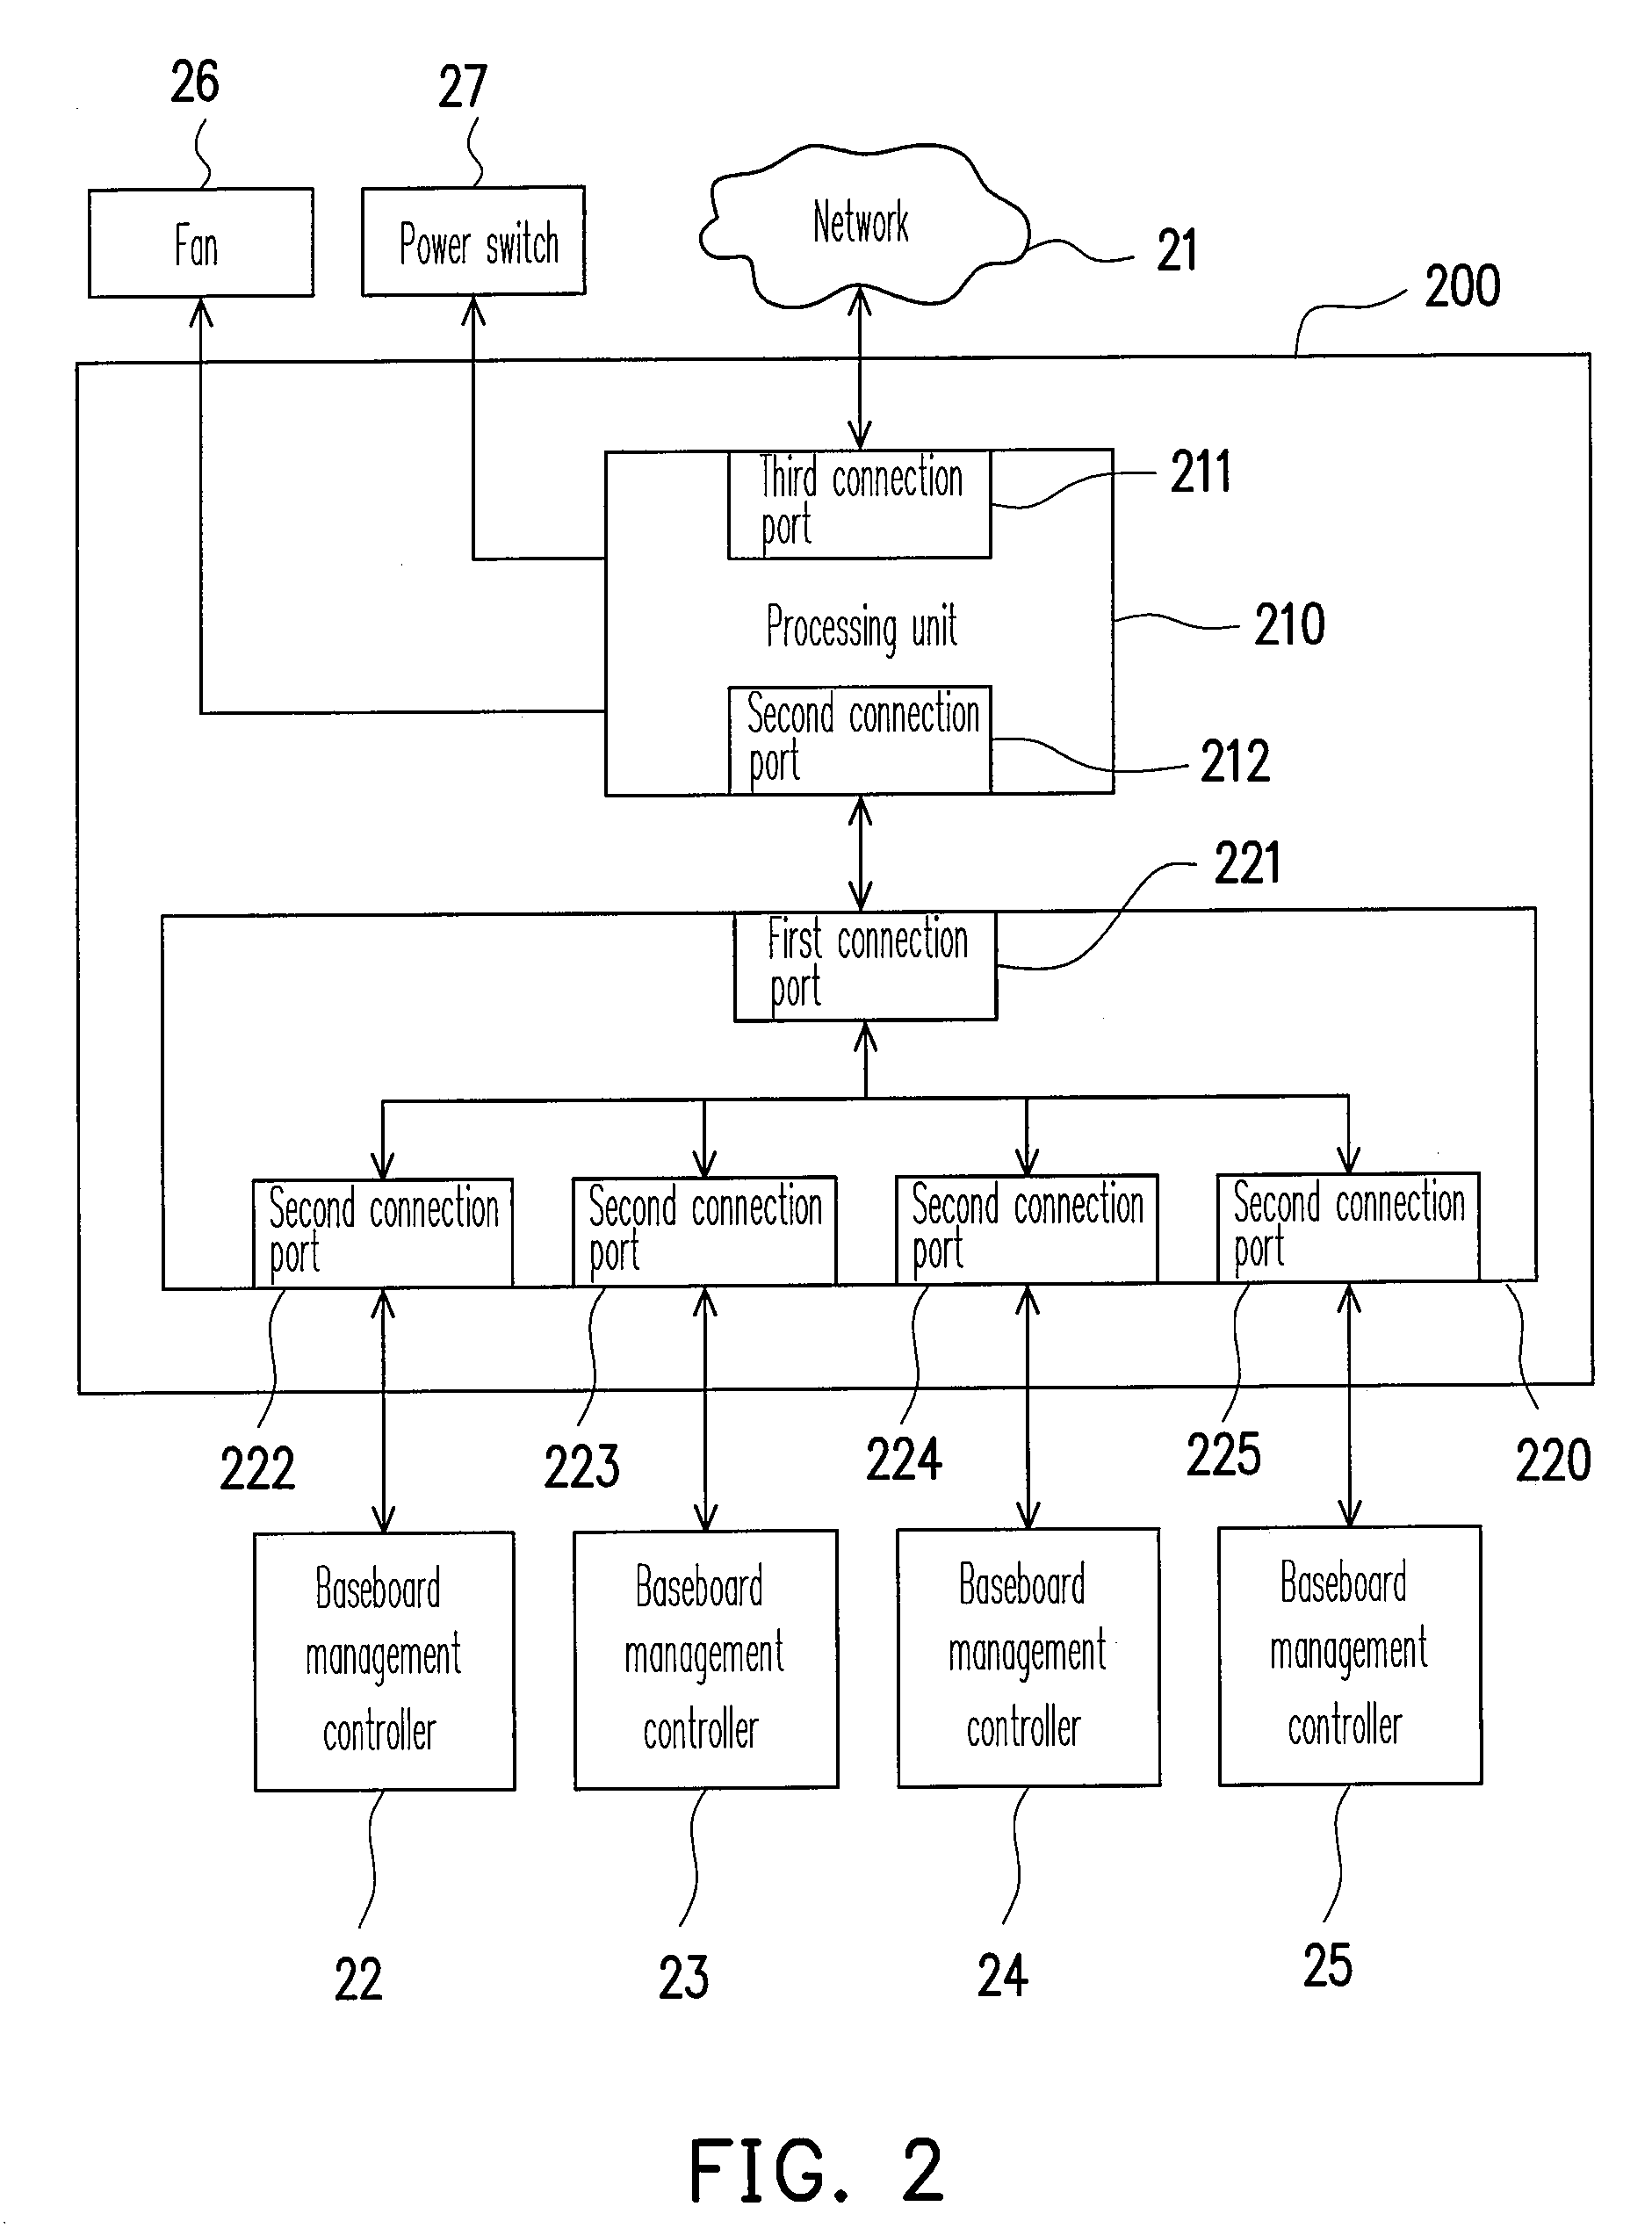 Apparatus and method for computer management